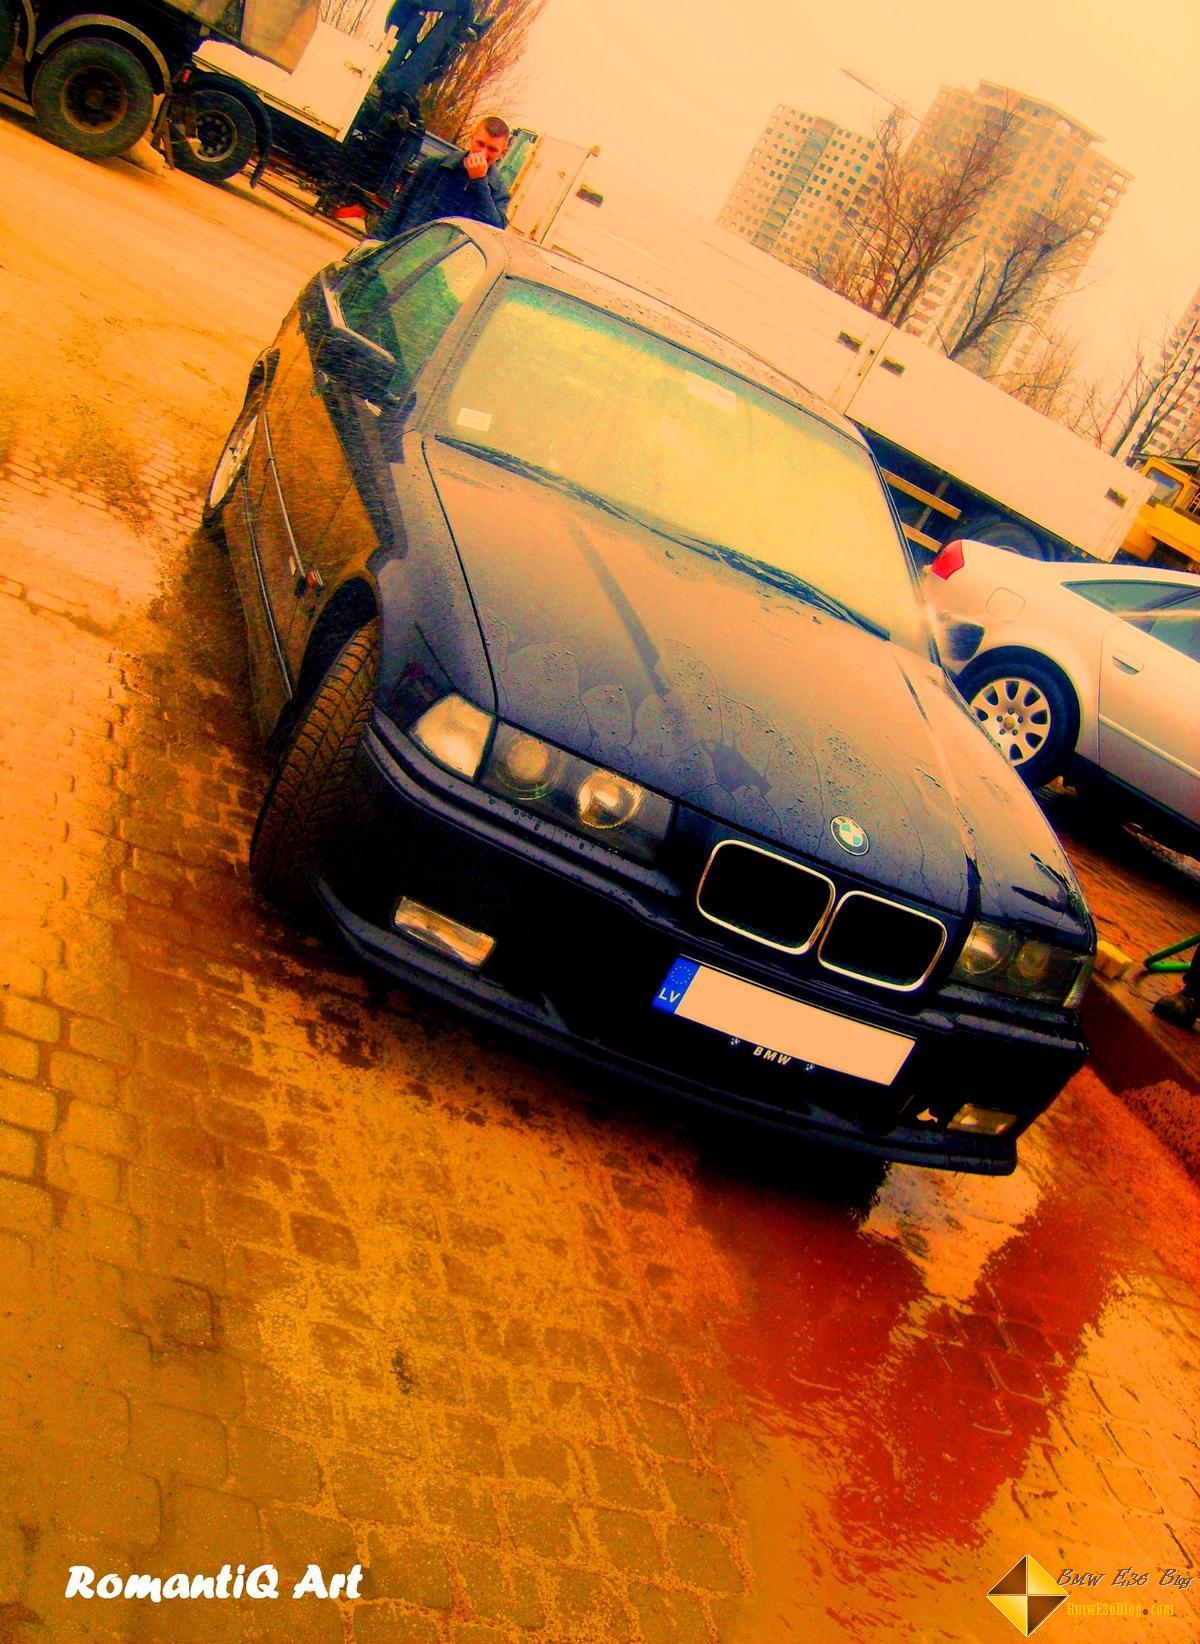 photos bmw e36 misc wallpapers bmw e36 misc wallpapers 09 